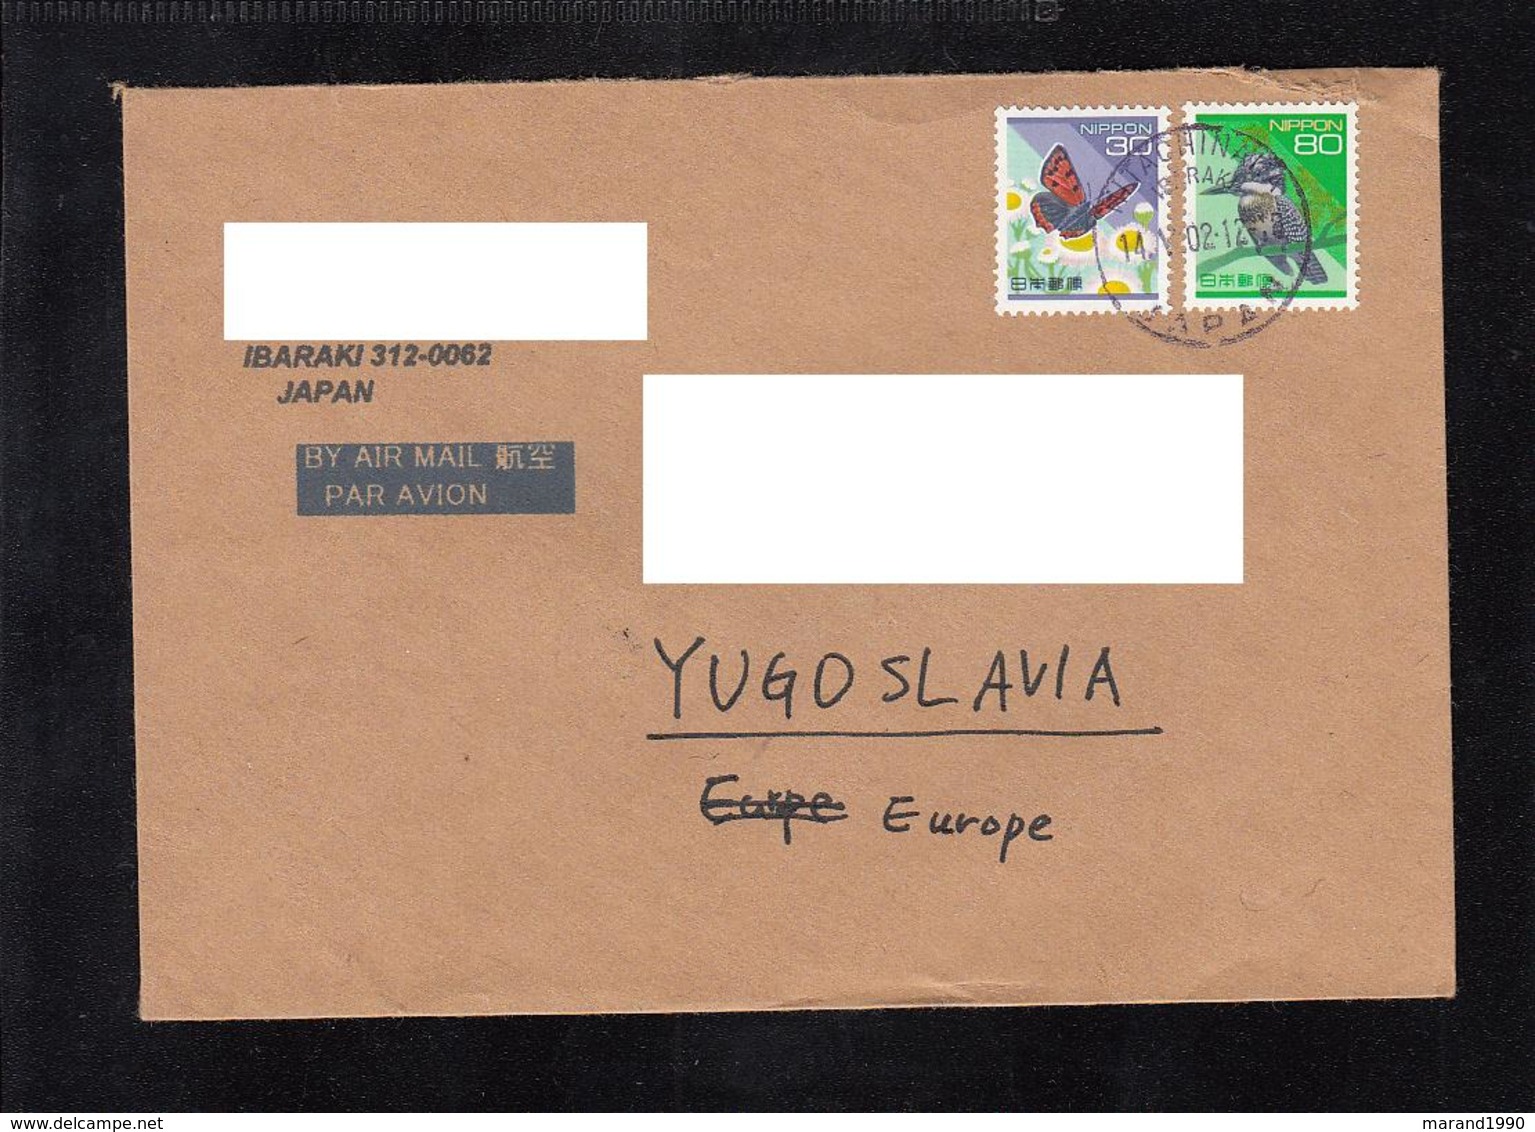 COVER / JAPAN BUTTERFLYES YUGOSLAVIA ** - Paons